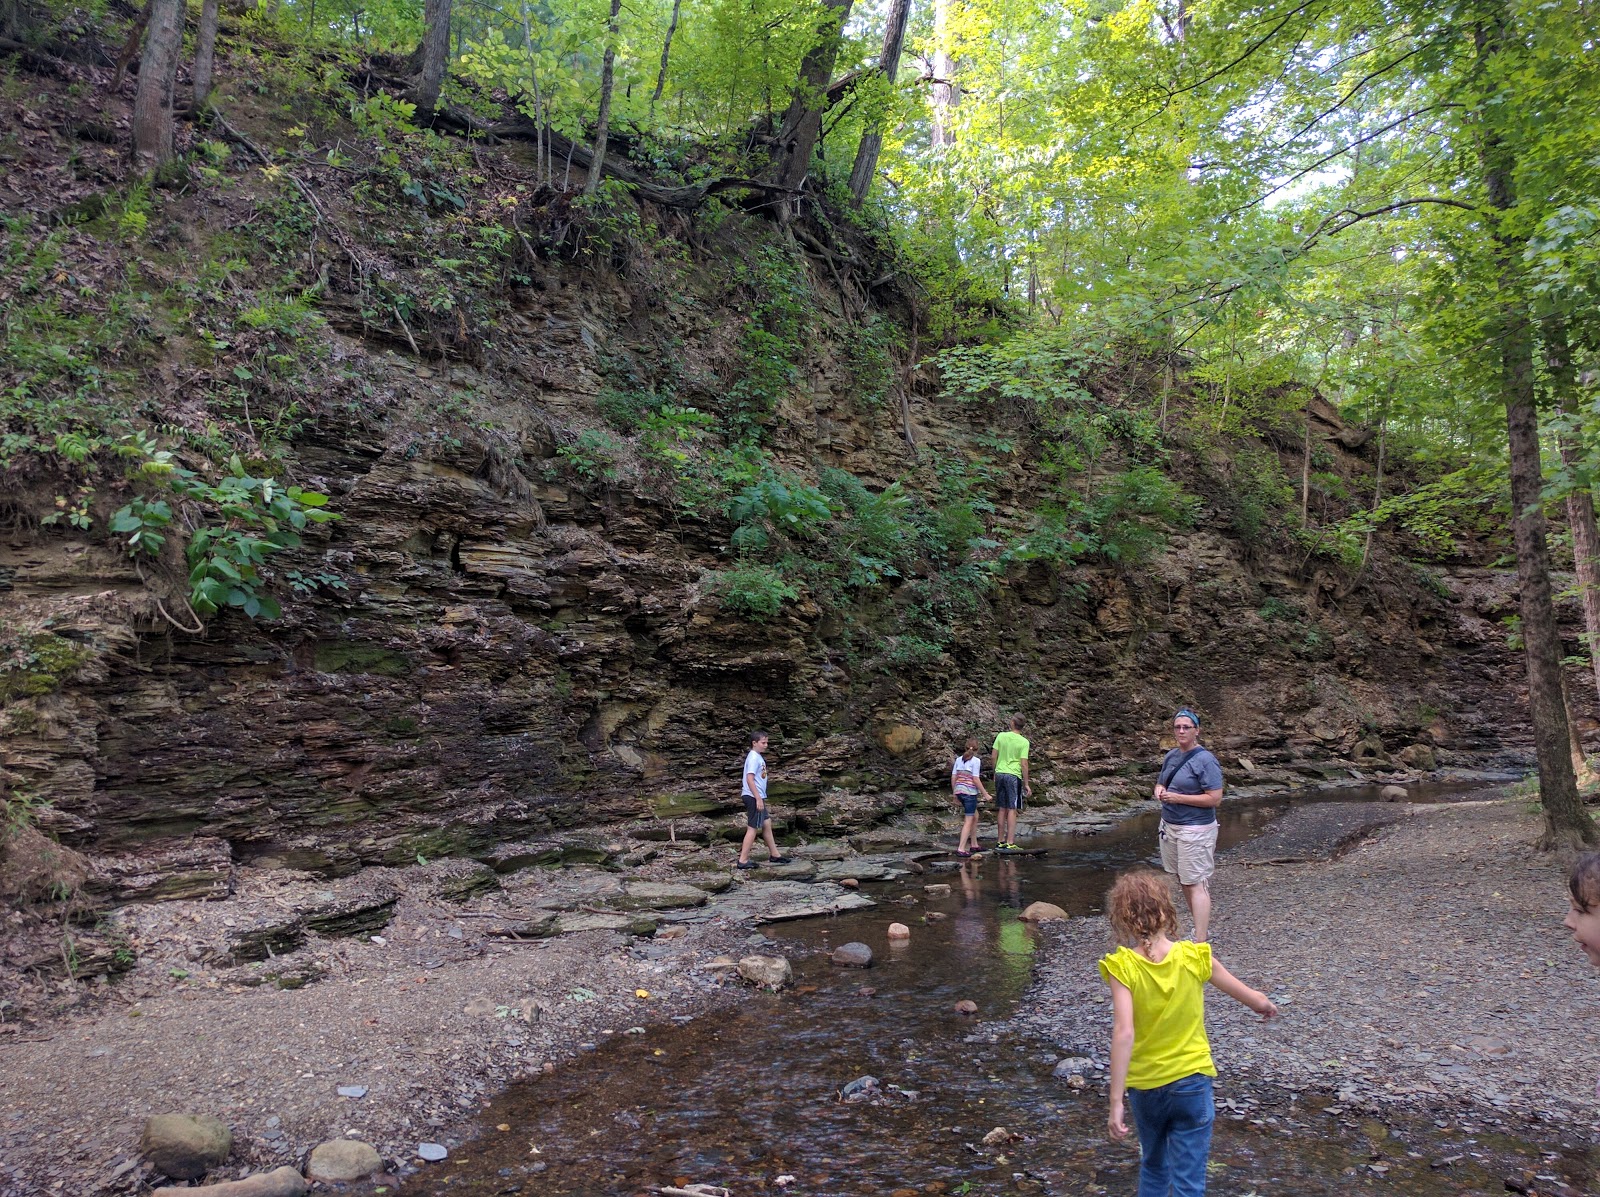 Wordless Wednesday: Creeking at Shale Hollow with Friends